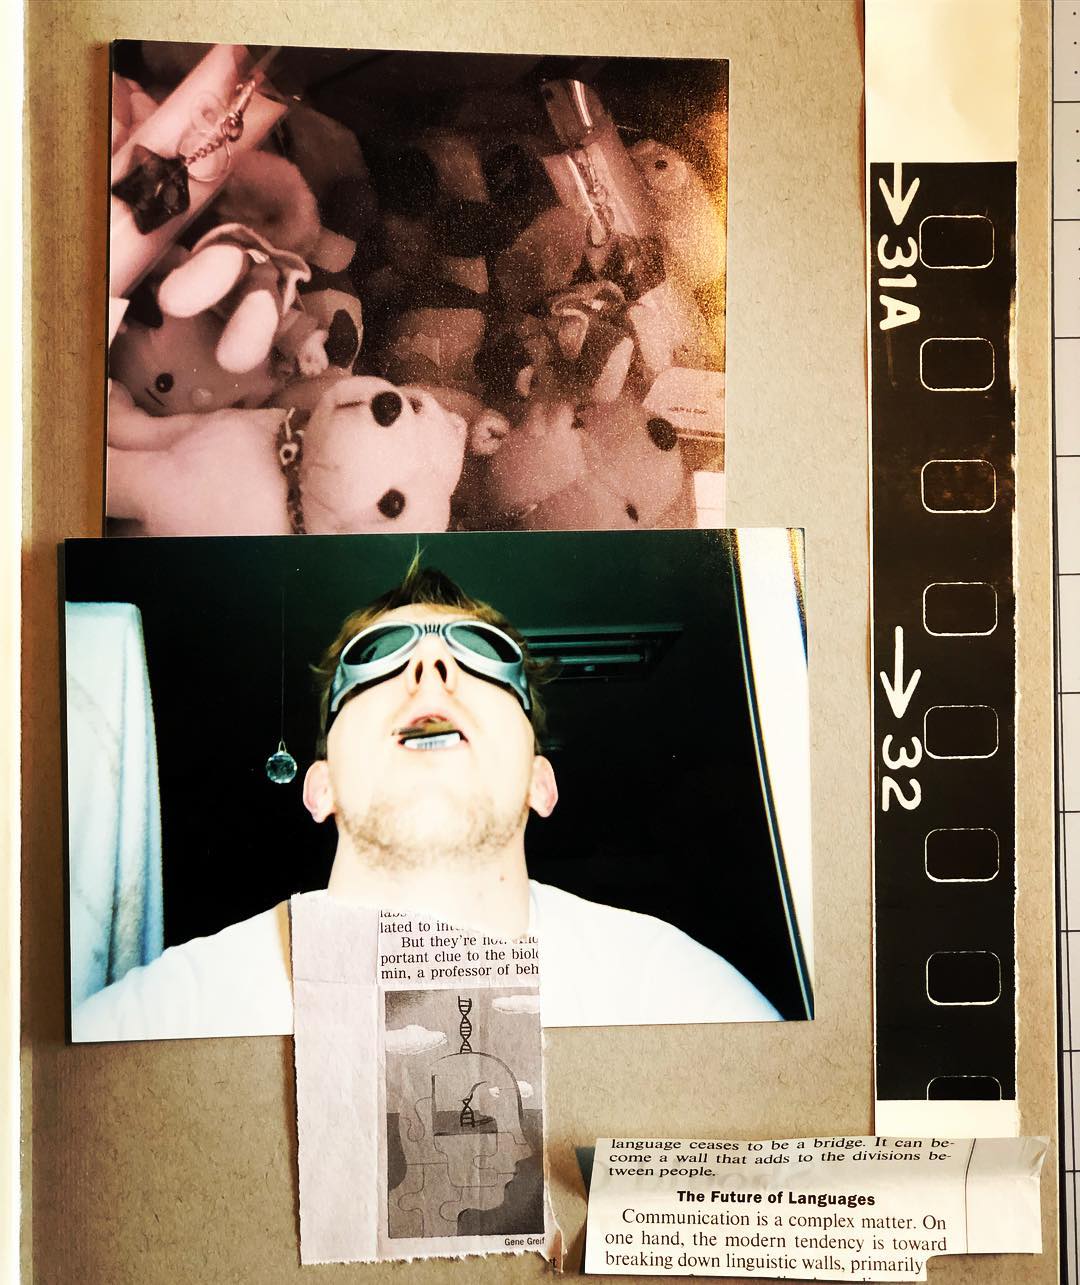 Inspired by a bunch of stuff from #kolajfest I’ve started the grey book. Collected materials over the years. Minimal cutting and only four image sources. Just to keep busy. This one: “Preselfie with filmmouth”
OR
“#selfieasacollage”
~
✄
✄
✄
✄
~
#kolajfest #art #artist #collage #creative #colorful #paper #colour #design #clean #craft #beautiful #abstract #minimalism #paperart #abstract #papercut #papercutart #instaart #artistsofinstagram #doitfortheprocess #supplyanddesign #makearteveryday #cutpapercollage #surrealism #papercollage #analoguecollage